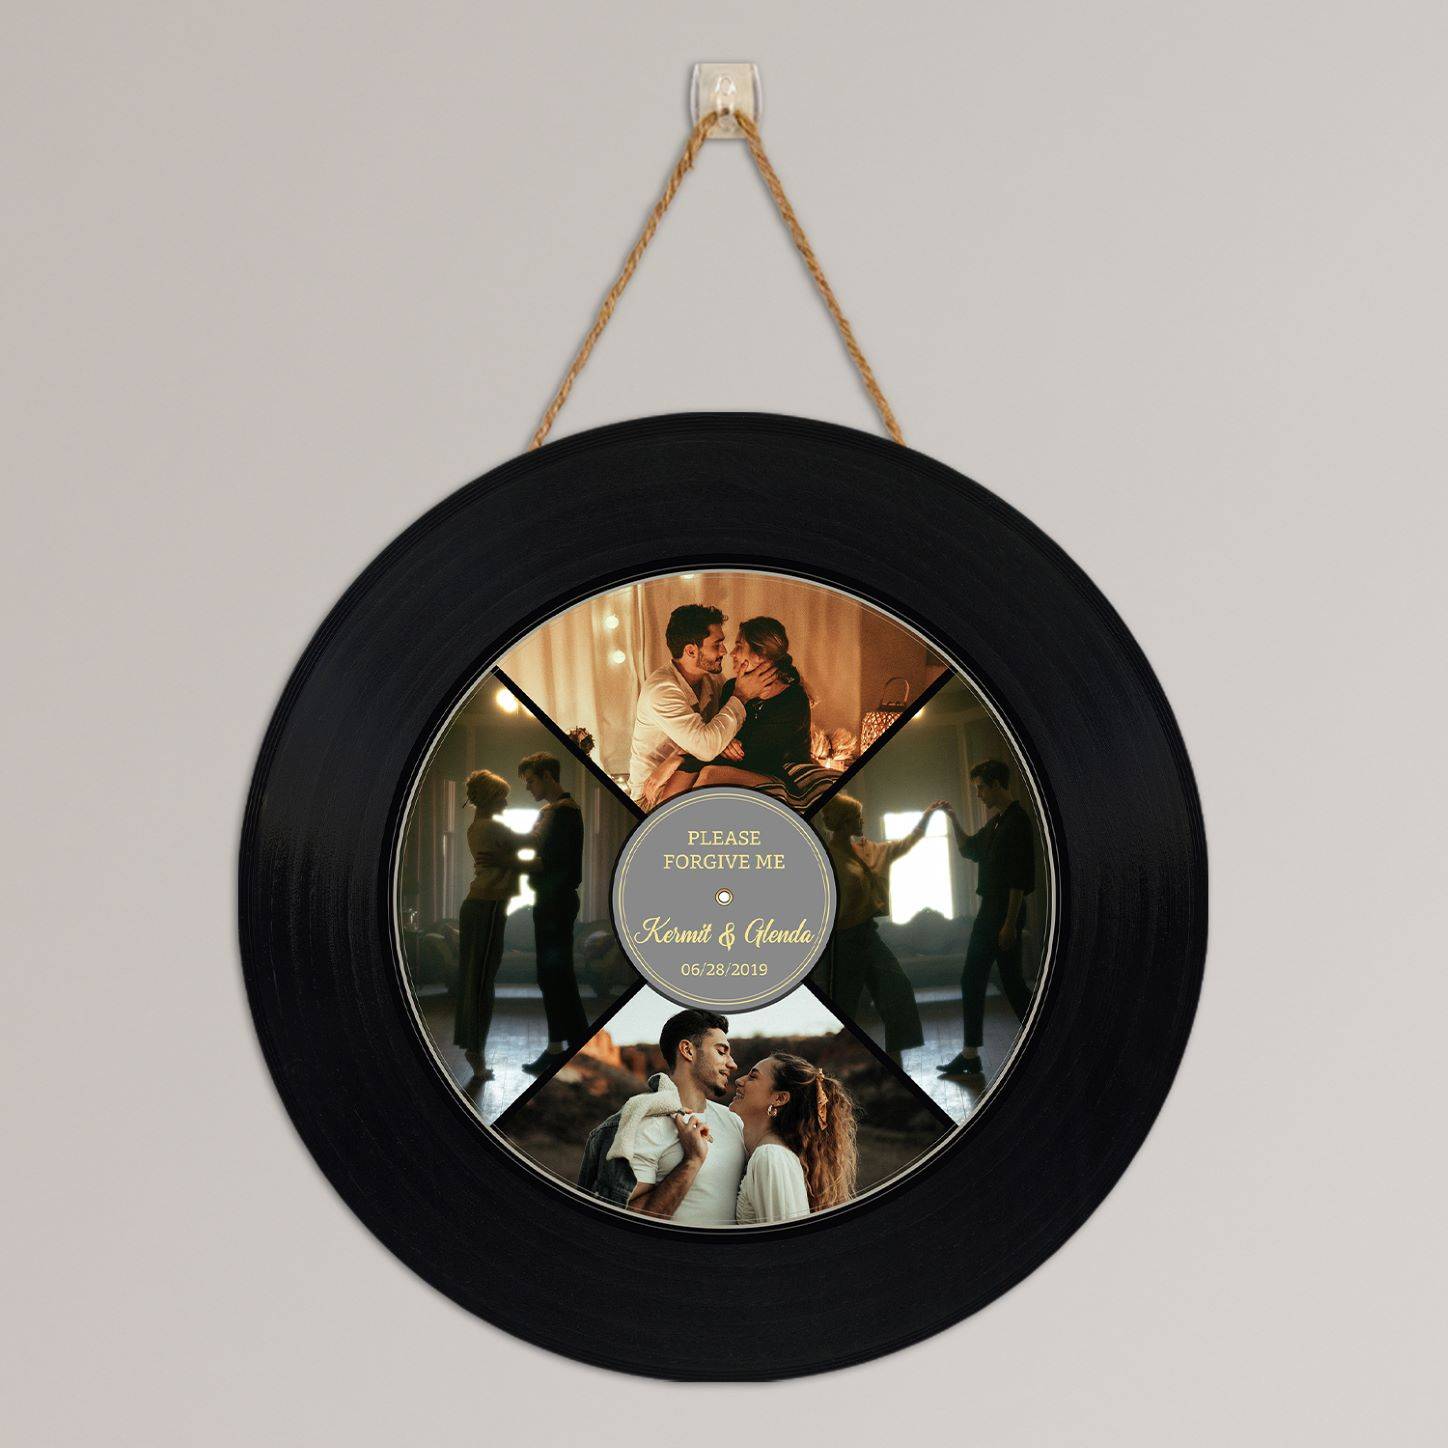 The circular wooden sign designed with the image of the two of you will be perfect for hanging in her house.